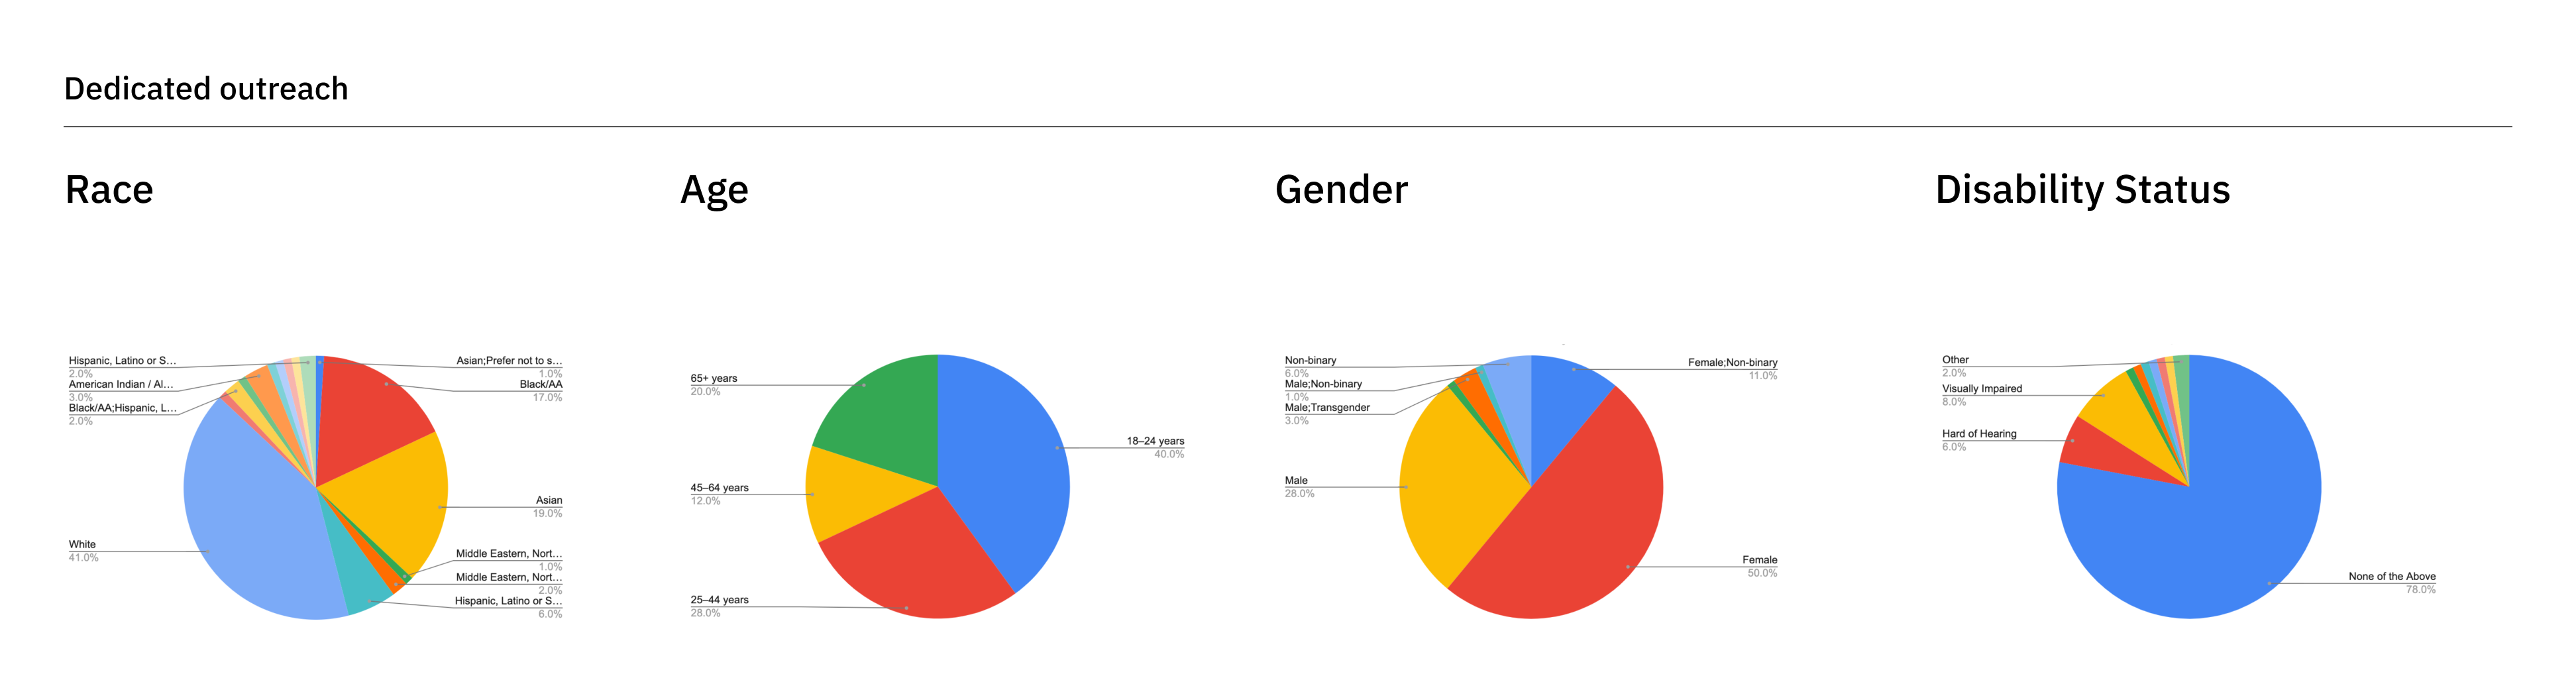 Pie chart breakdowns of an inclusive, dedicated participant outreach process showing greater diversity across age, disability status, gender, and race.